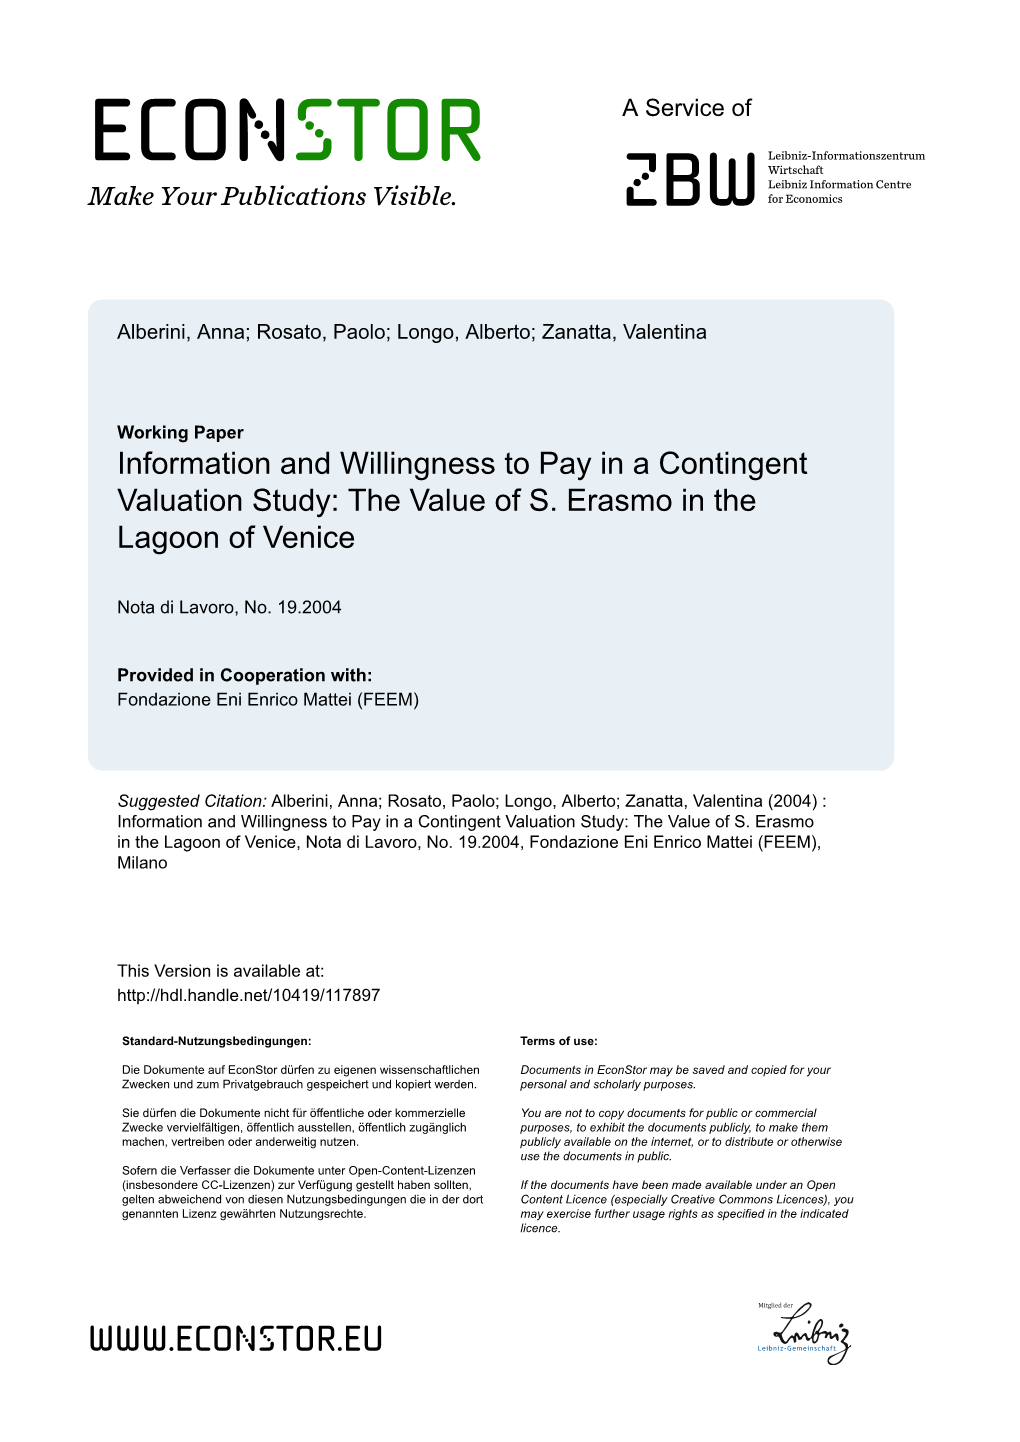 Information and Willingness to Pay in a Contingent Valuation Study: the Value of S